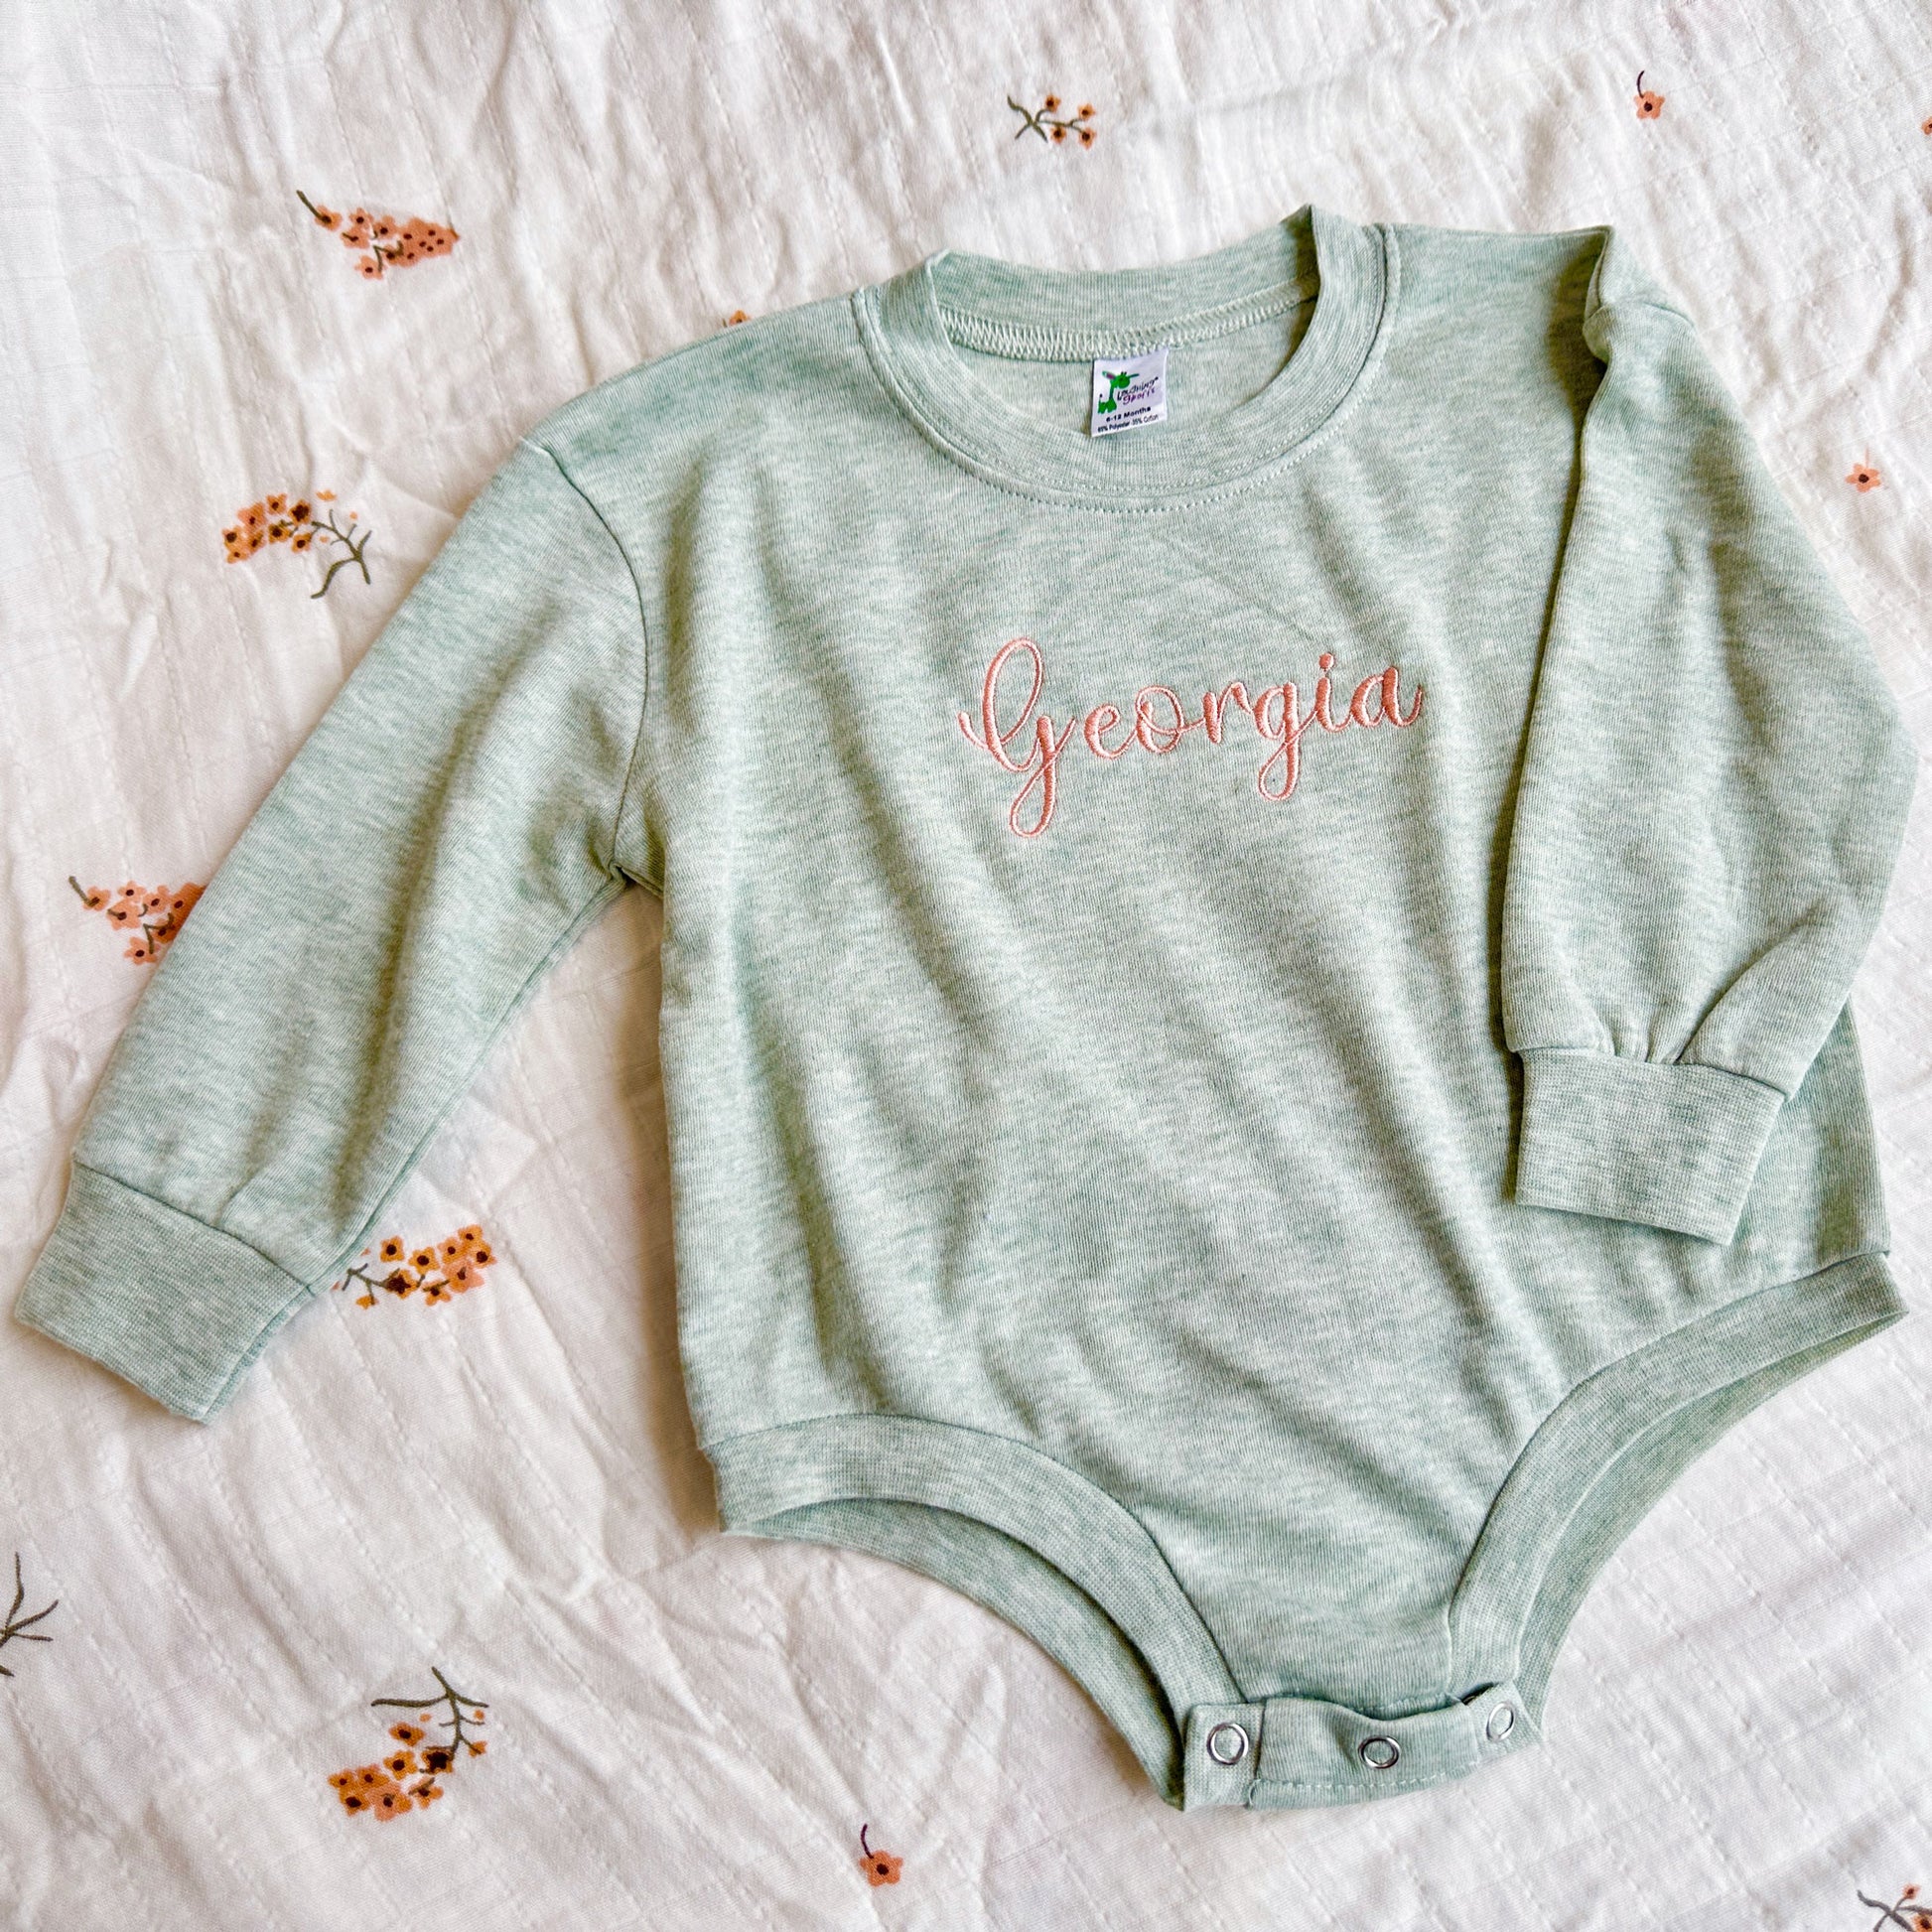 lightweight baby romper in a sage green with georgia embroidered across the center chest in a peach colored thread